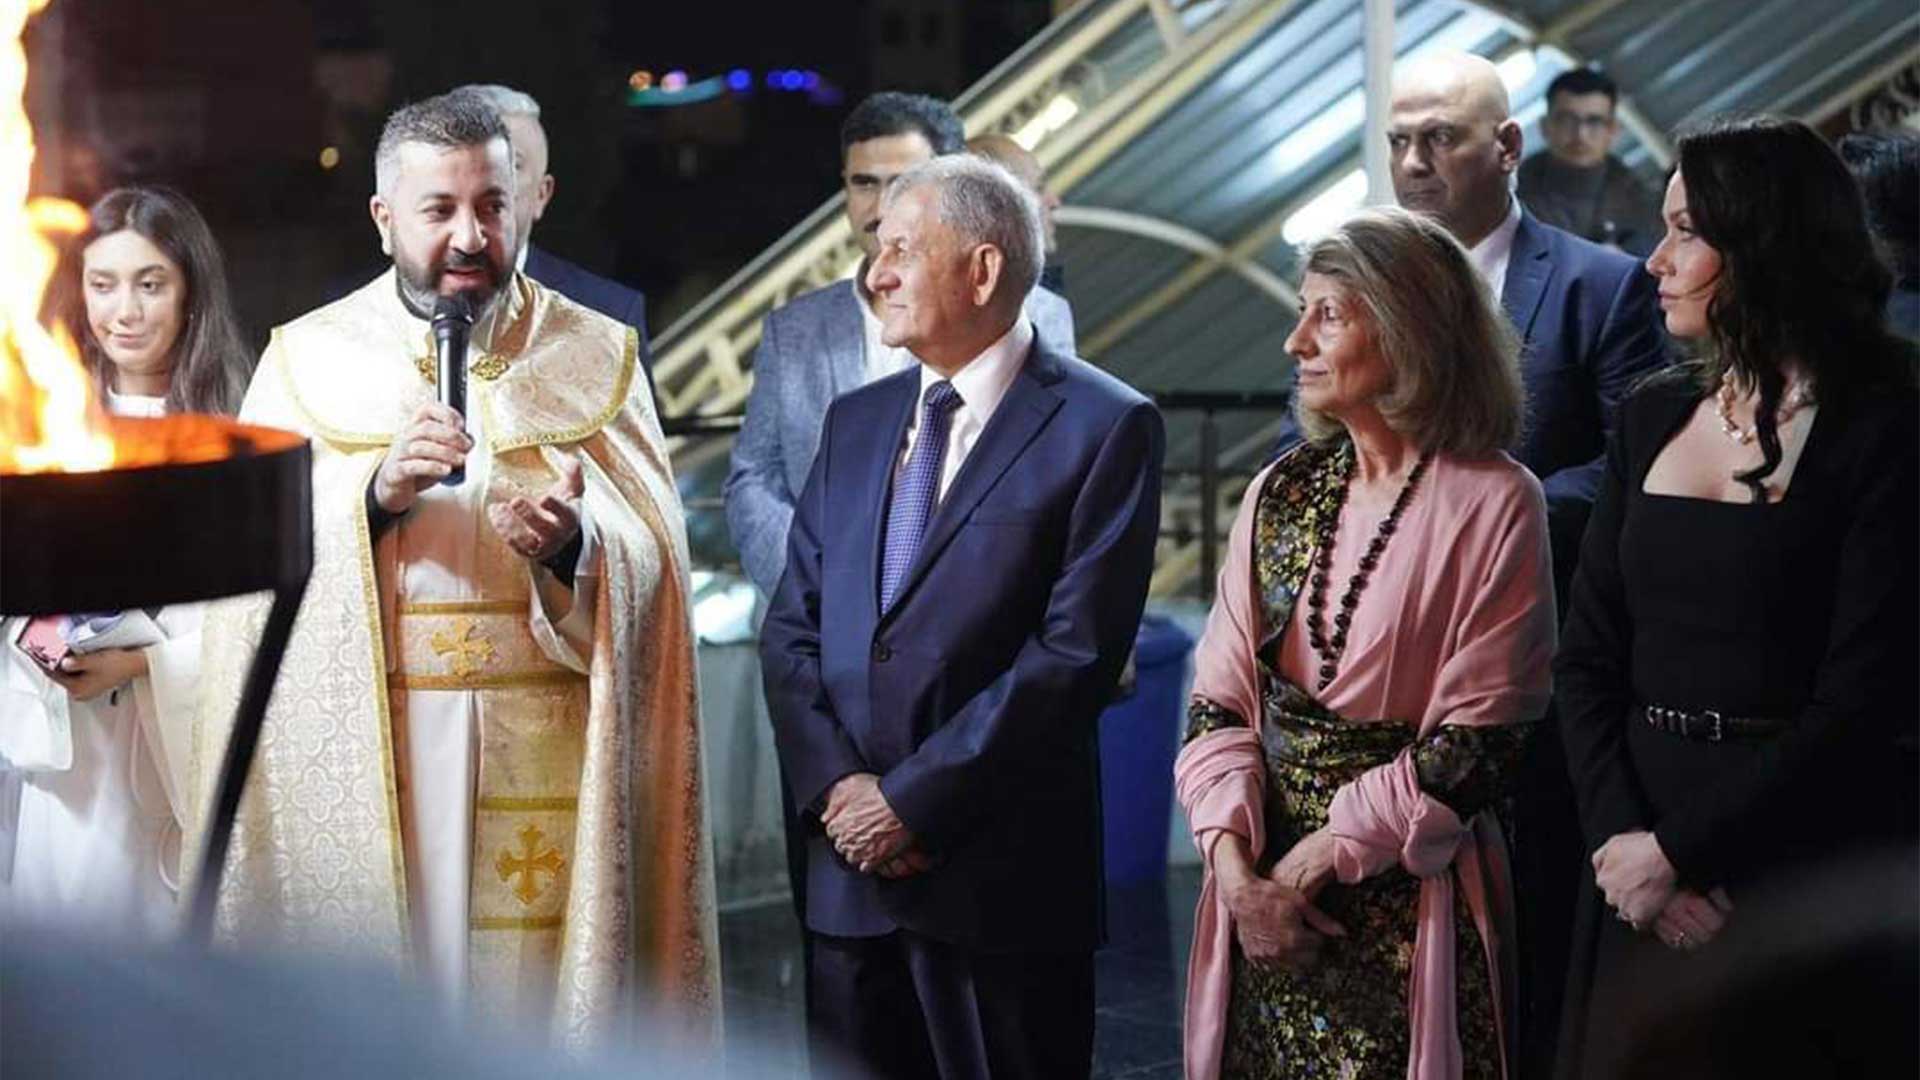   Iraqi President and First Lady at St. Joseph's Cathedral in Sulaymaniyah.